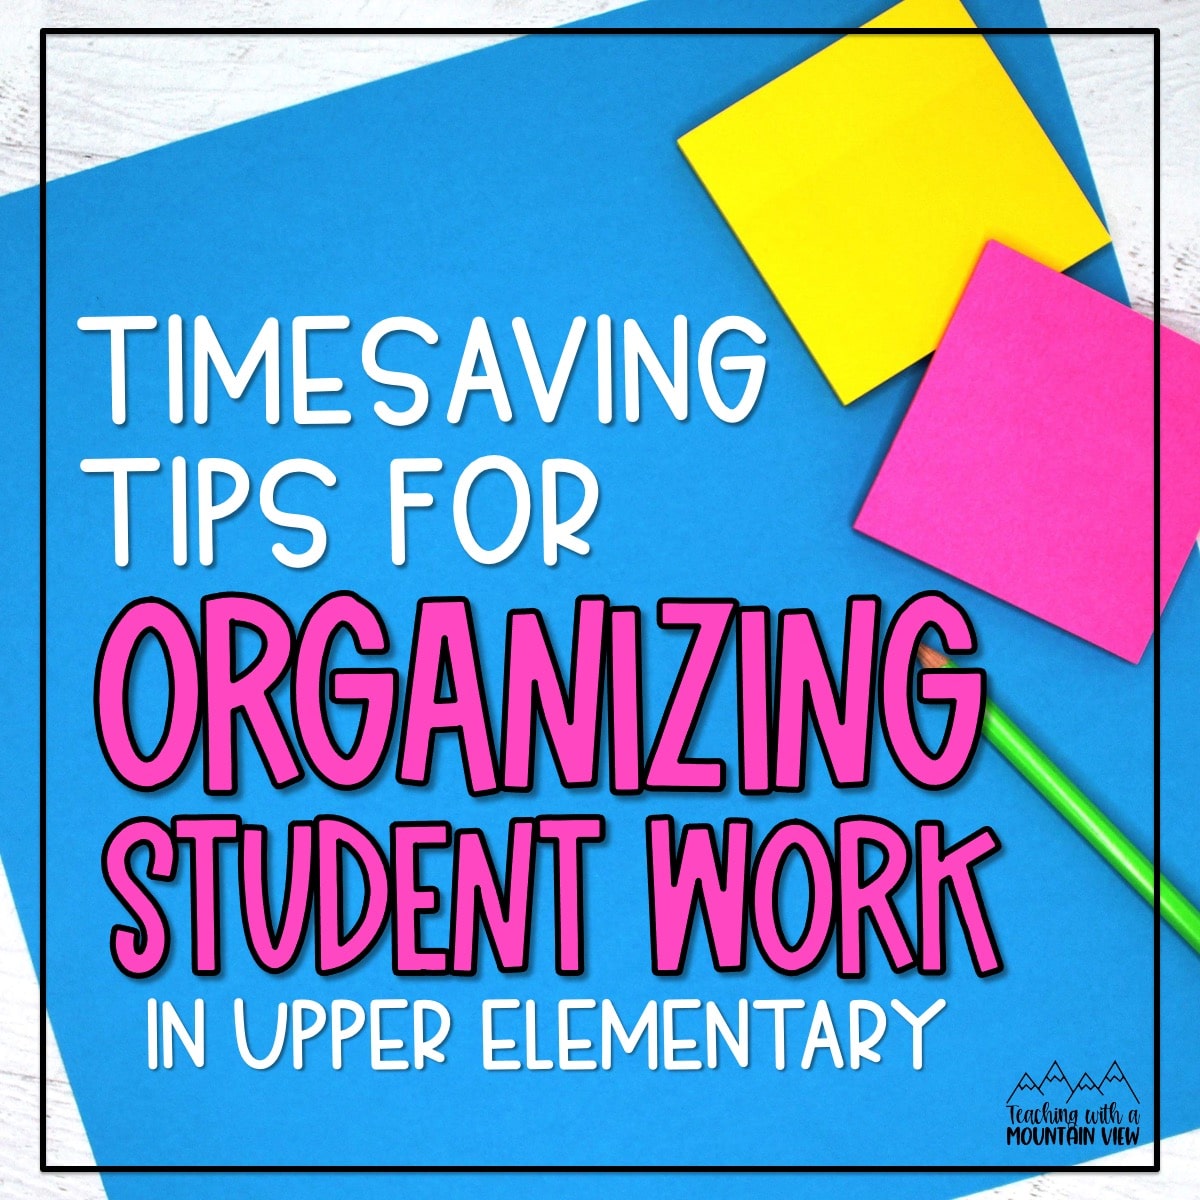 These tips will help you minimize missing assignments and develop a time-saving system for organizing student work in upper elementary.